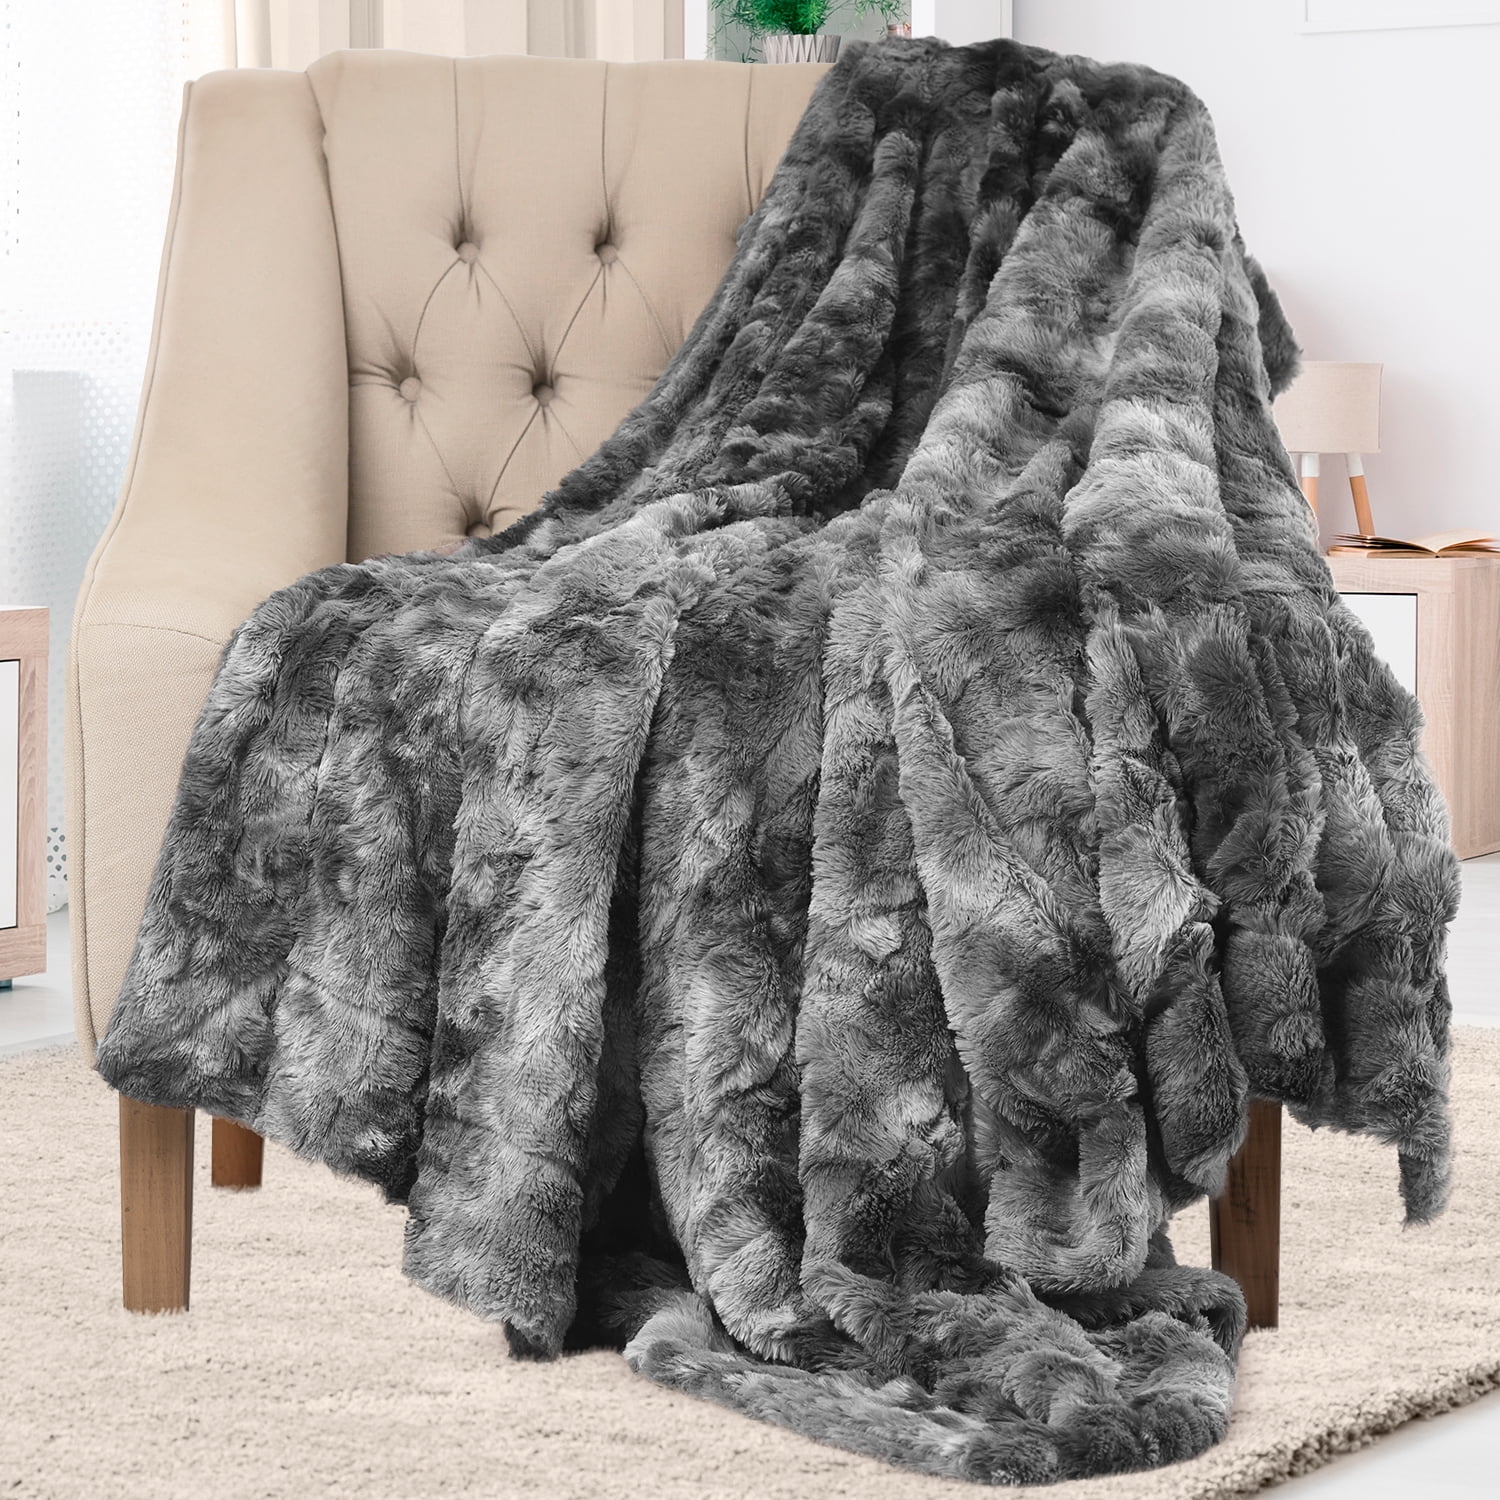 FAUX THROWS MINK BLANKET FLEECE BED LIVING SOFA SOFT LUXURY VARIOUS COLOURS SIZE 